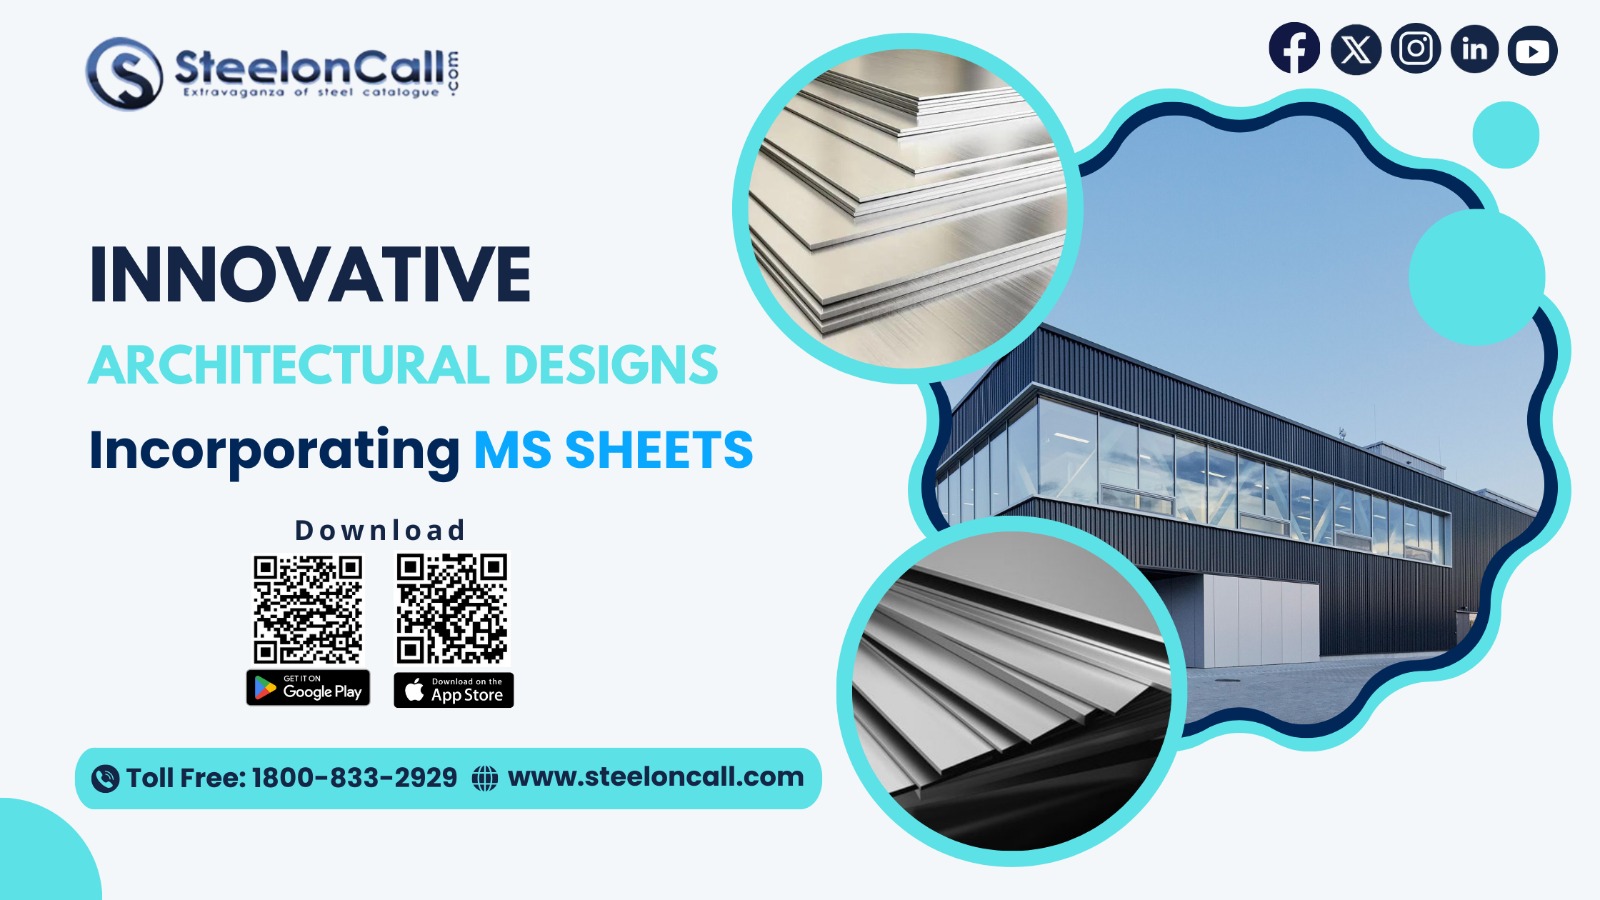 Innovative Architectural Designs Incorporating MS Sheets